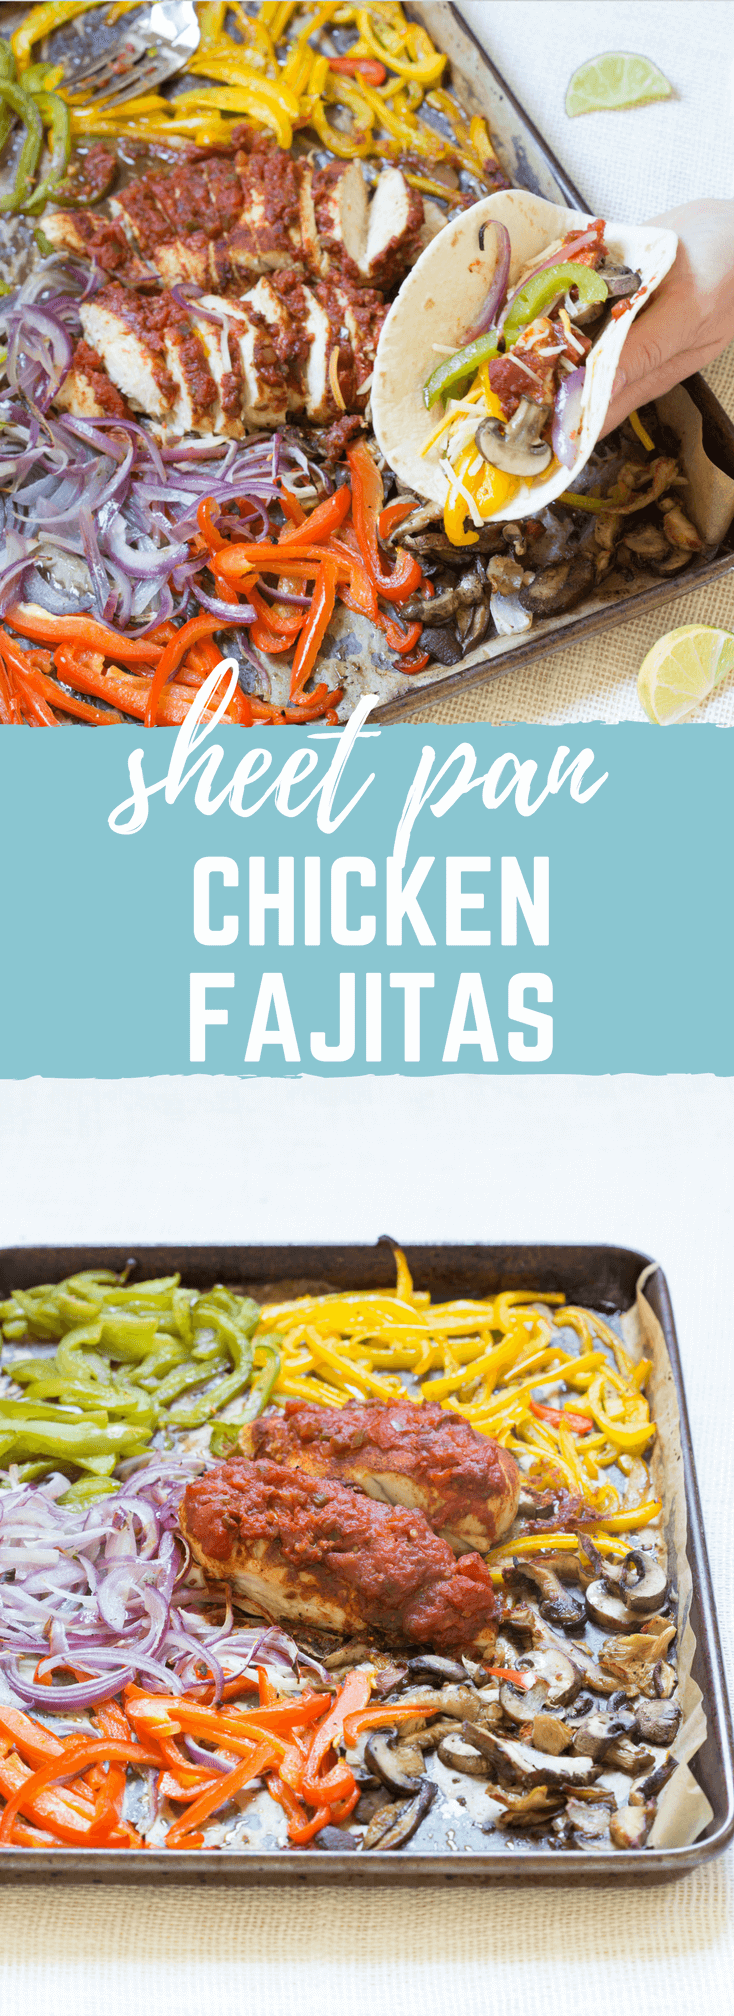 I hope you give this Sheet Pan Chicken Fajitas dinner a try. 